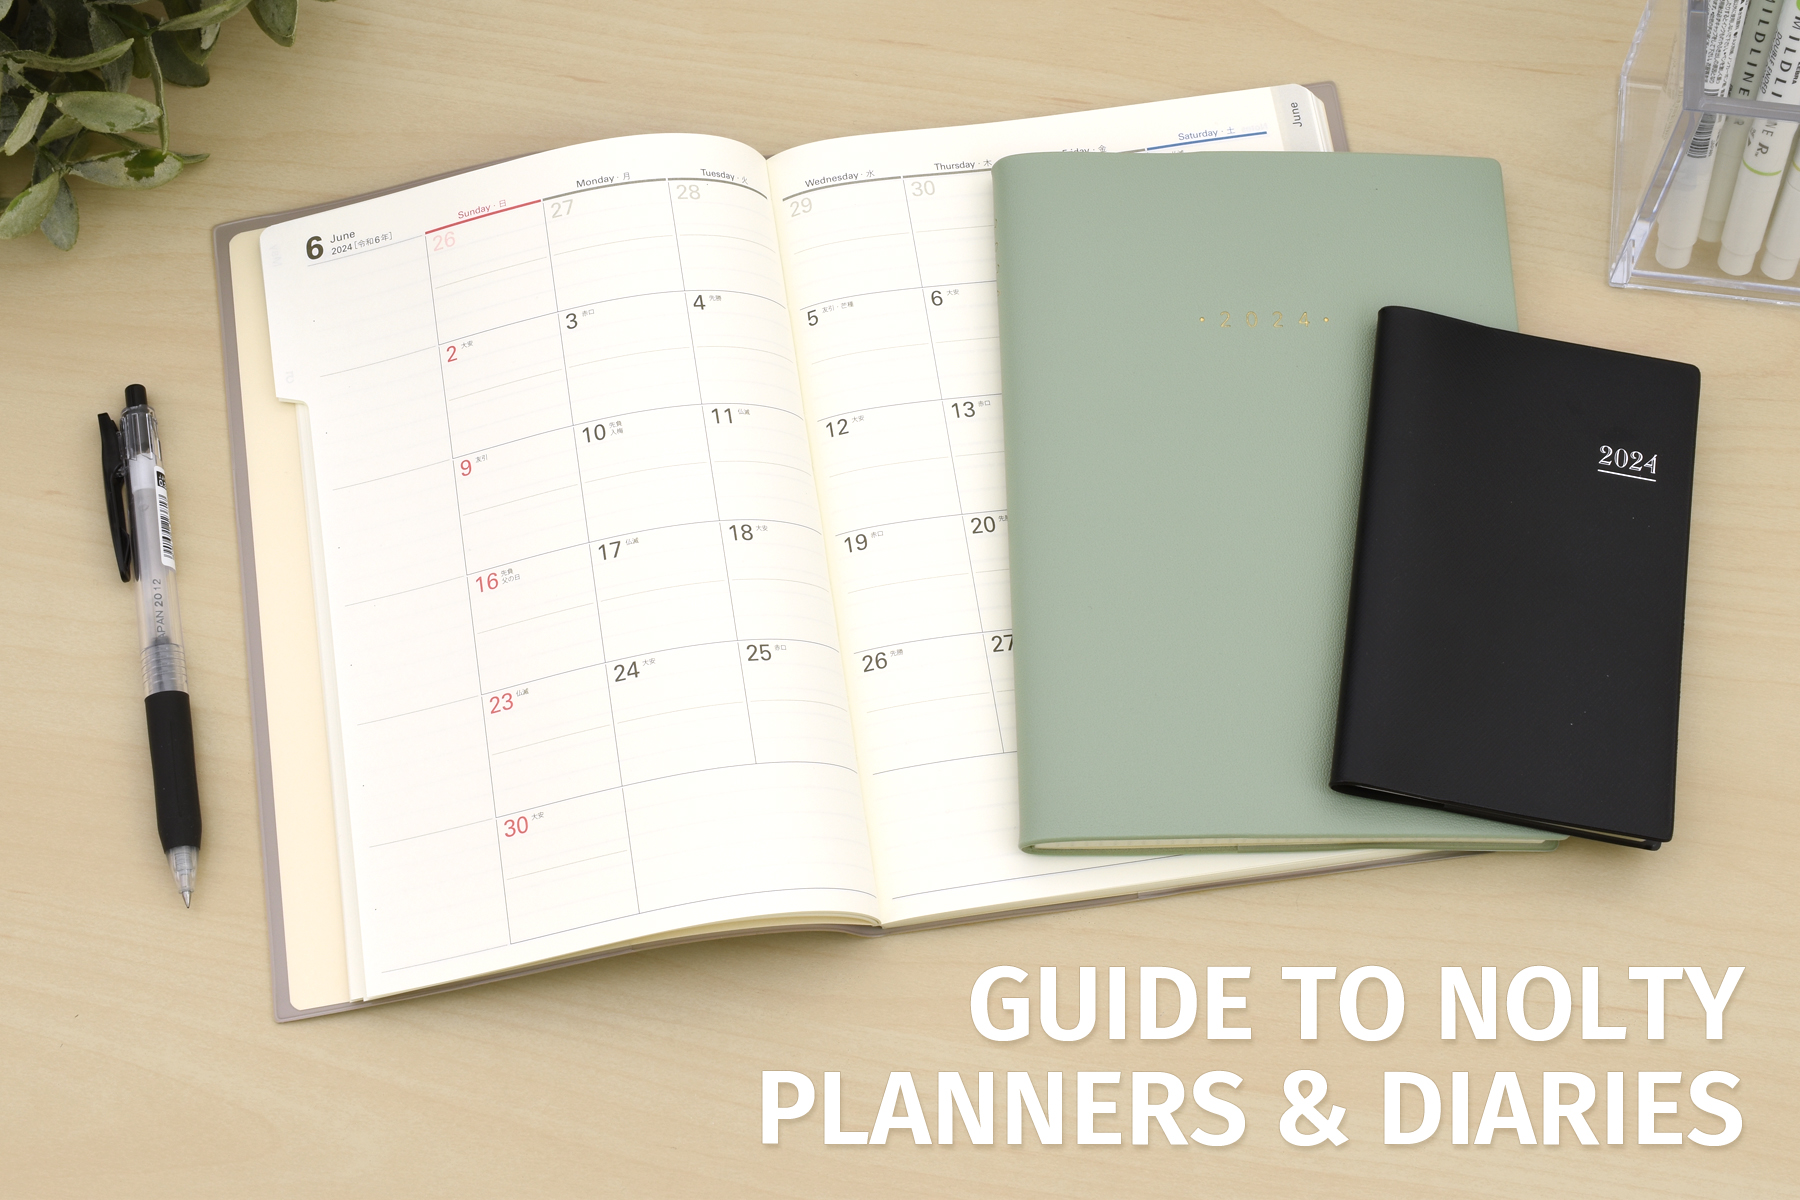 Guide to NOLTY Planners & Diaries